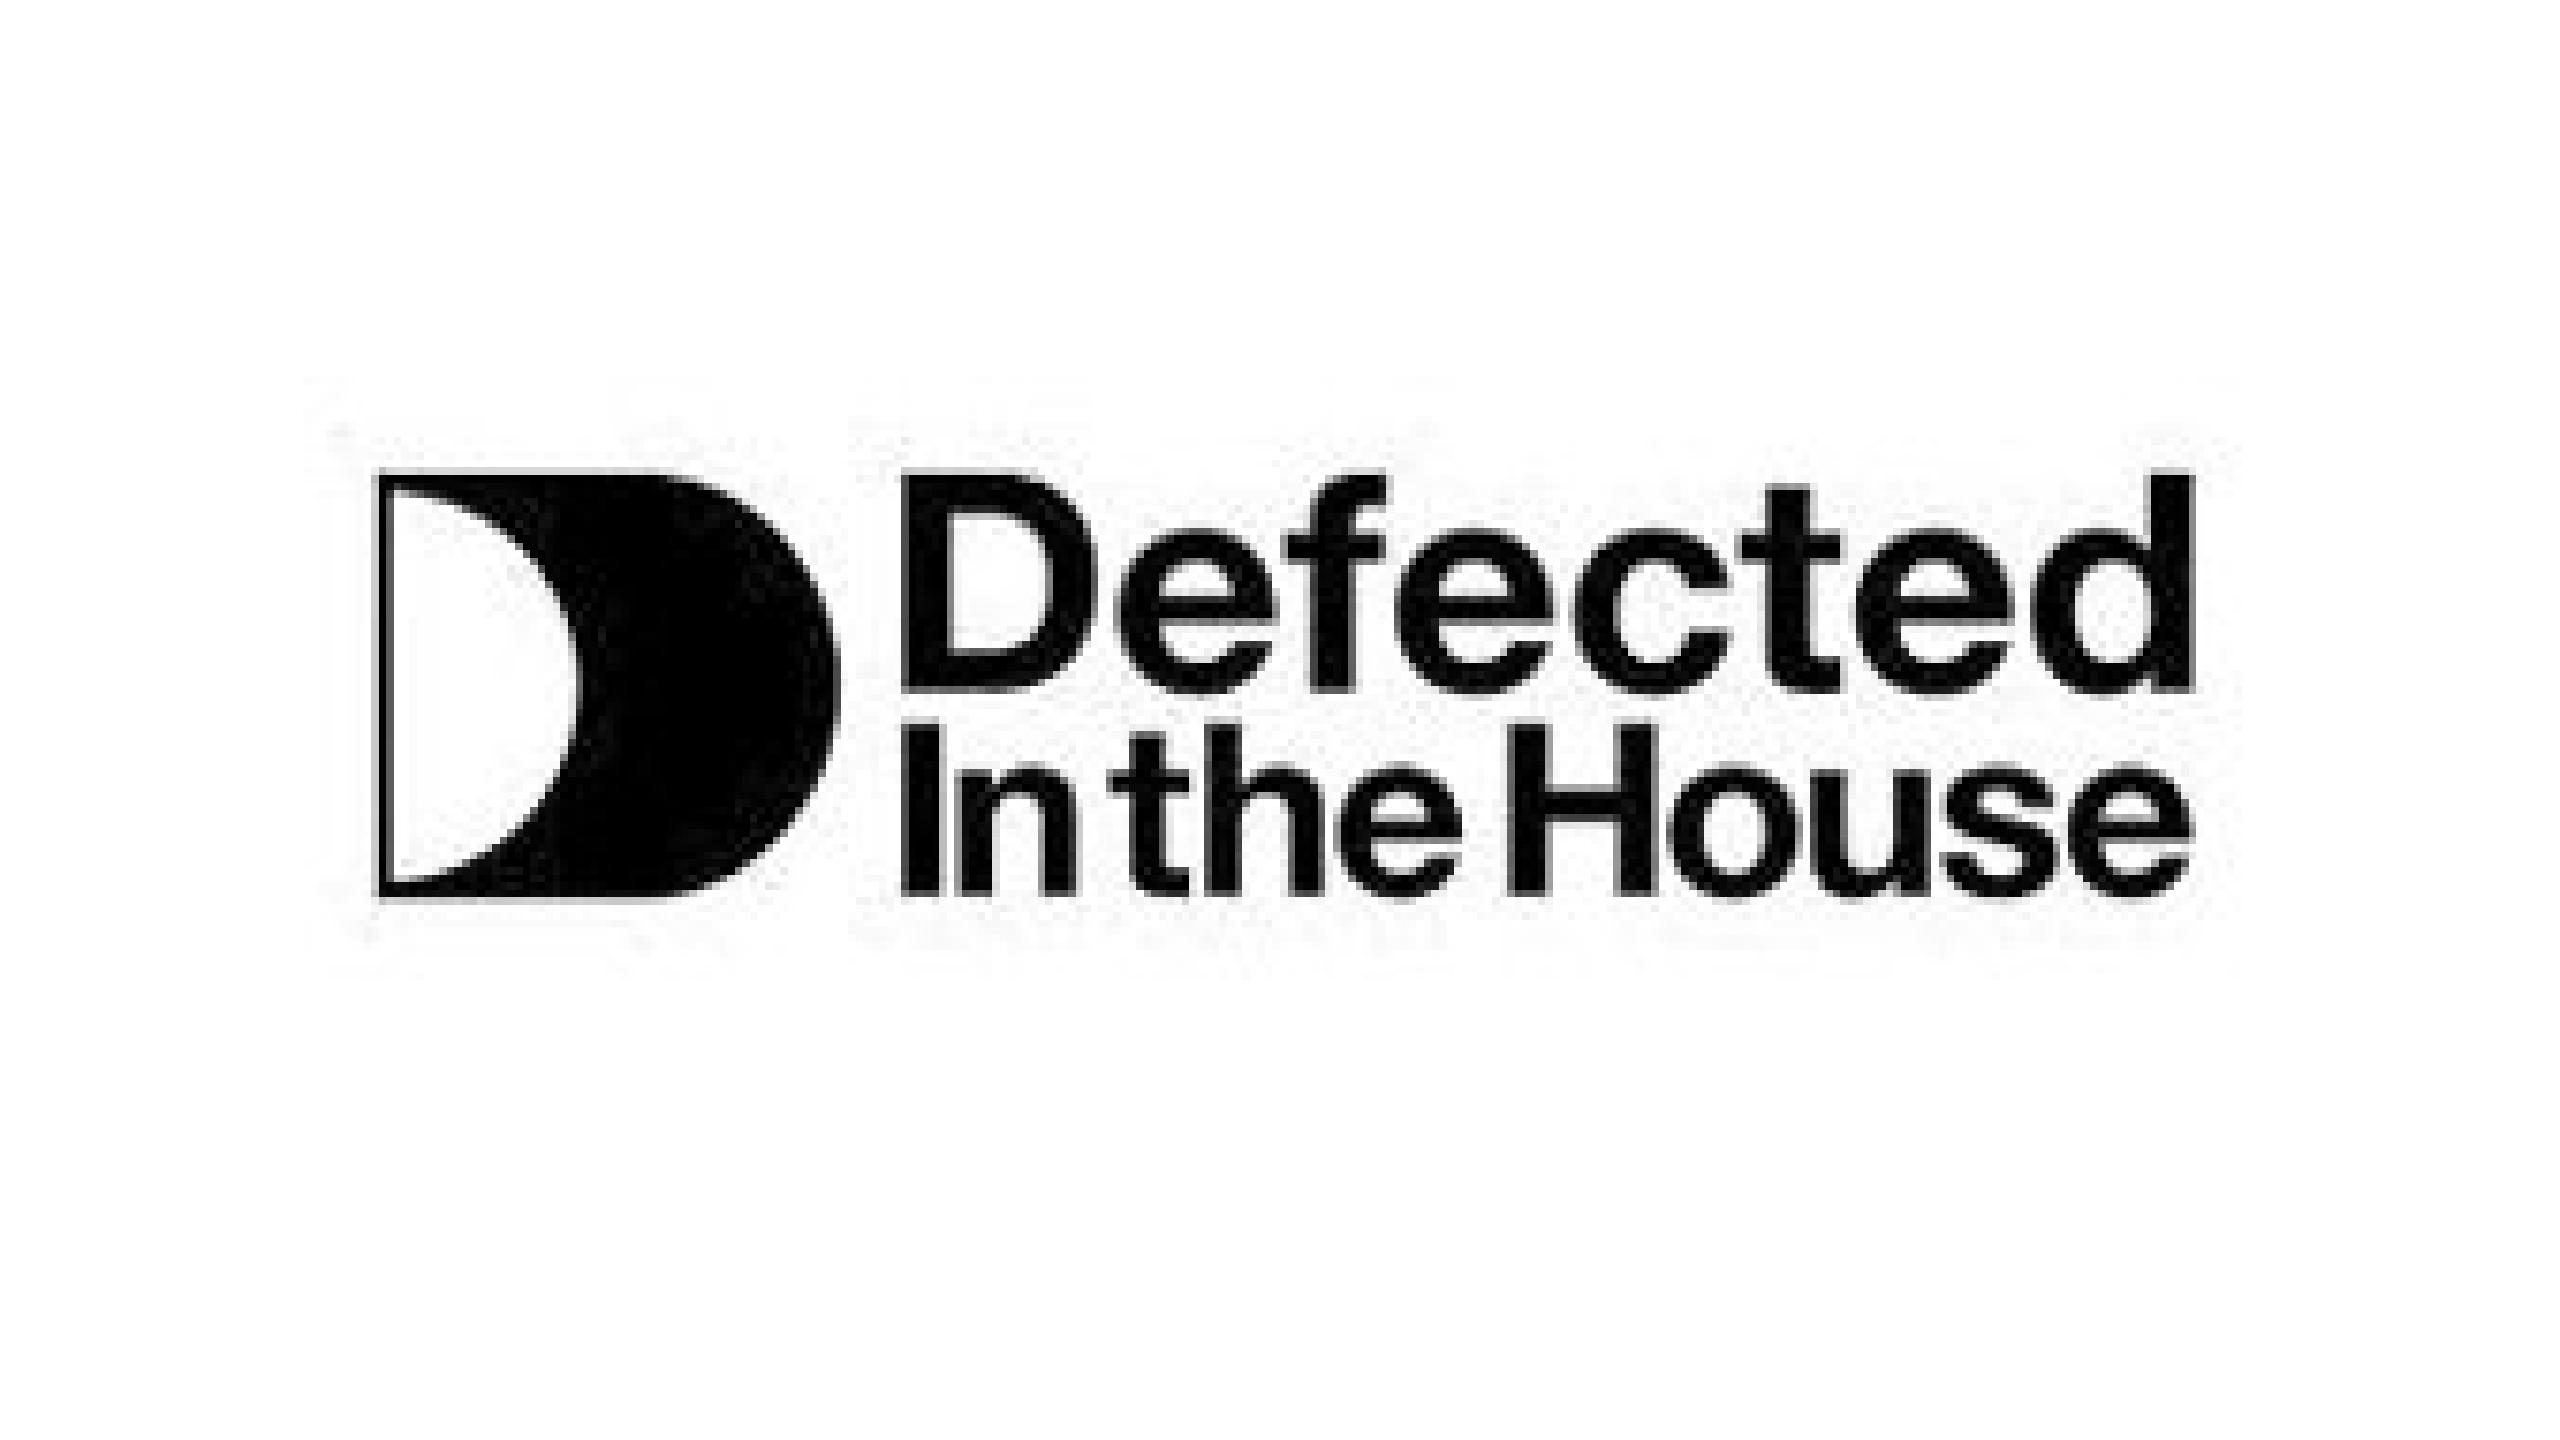 Defected In The House fechas de gira 2022 2023. Defected In The House